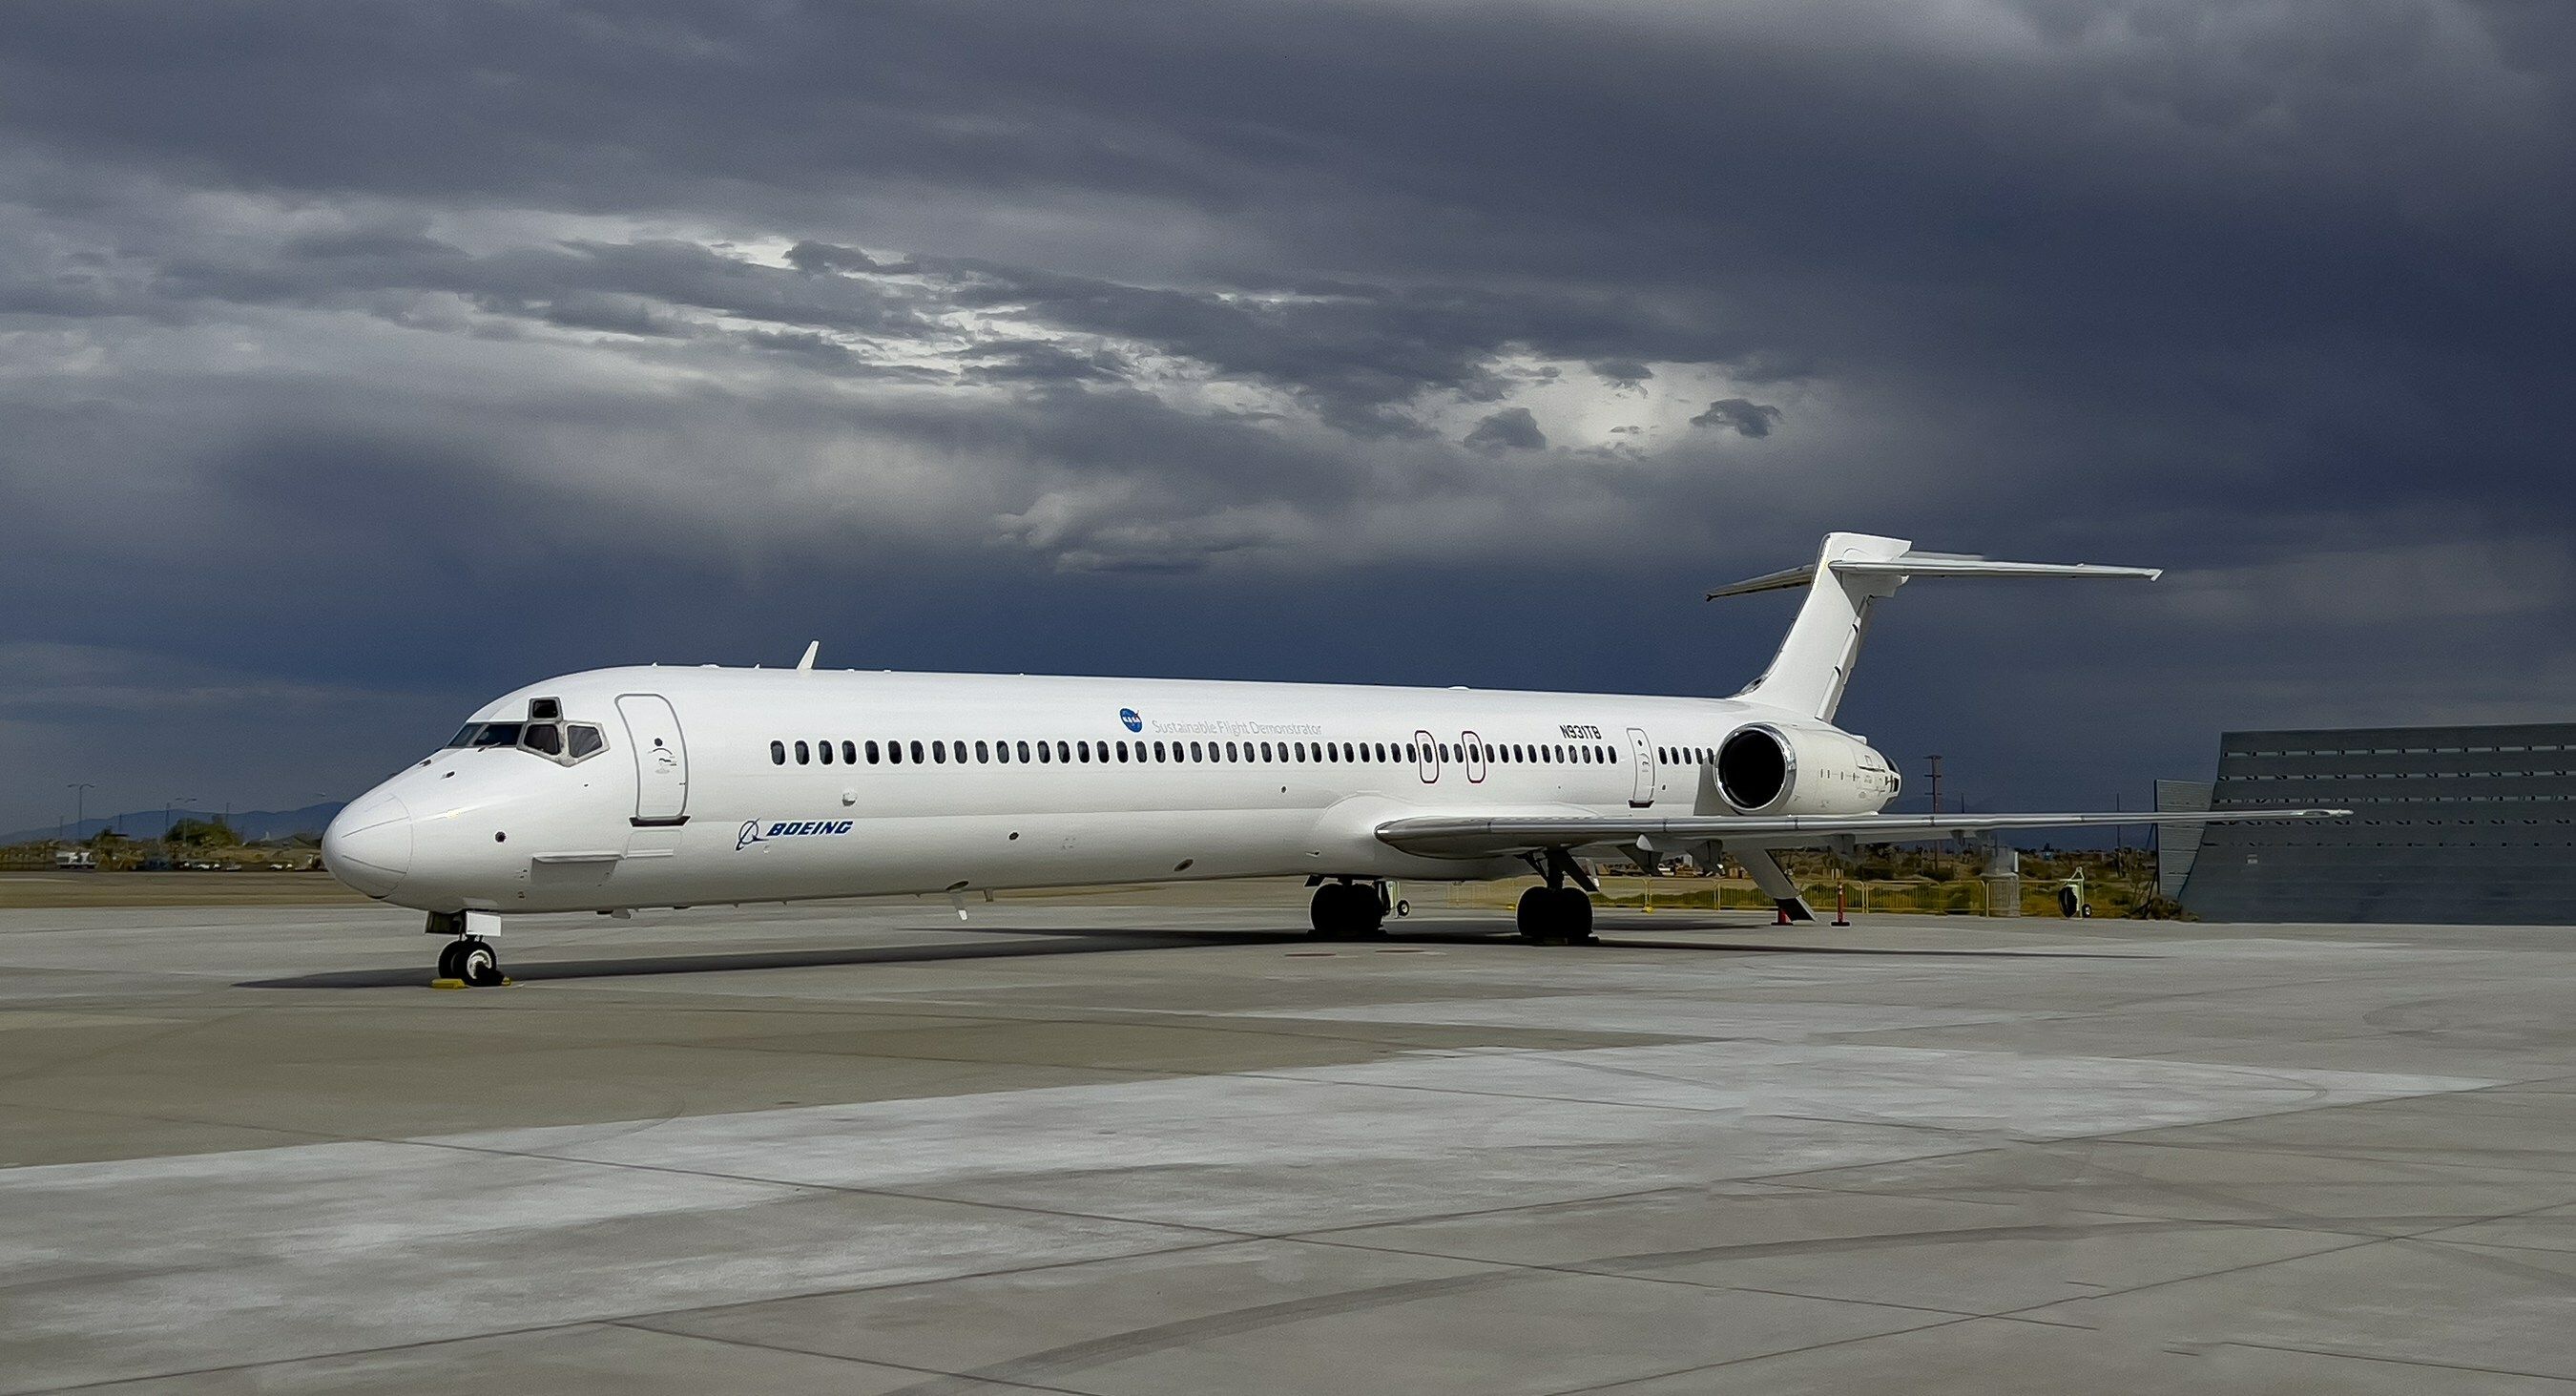 MD-90